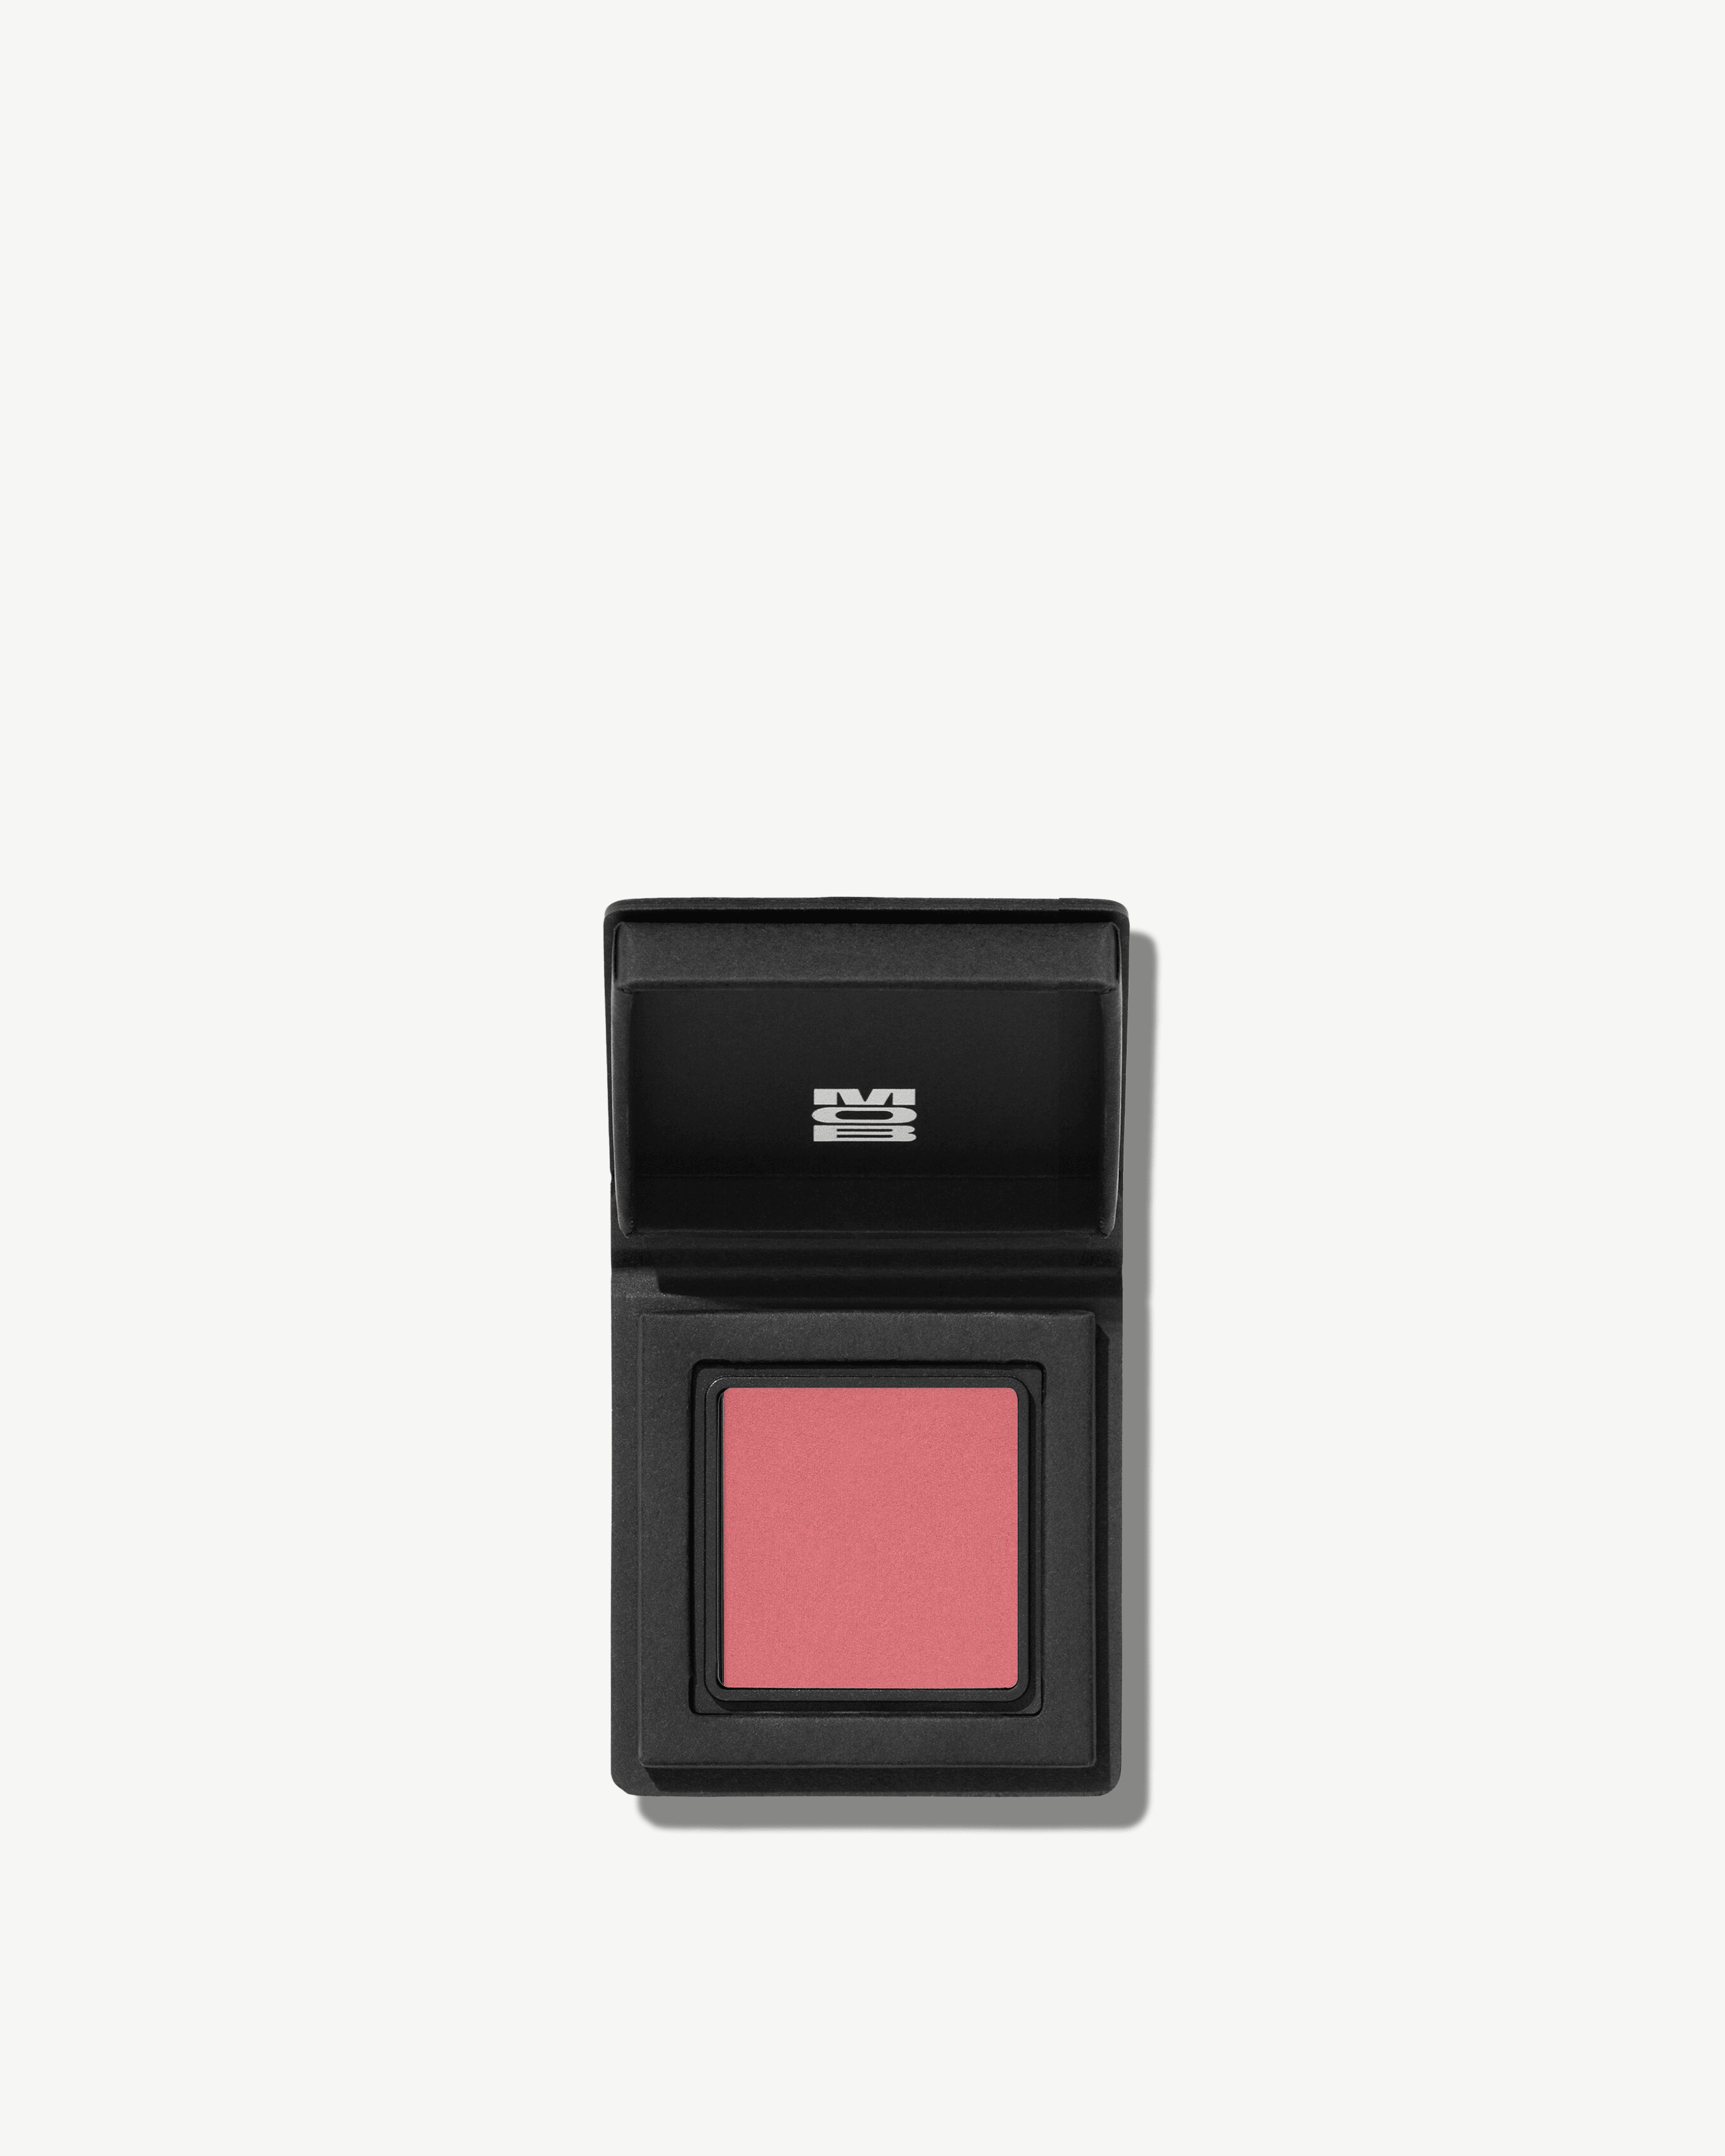 Mob Beauty Powder Blush Refill In Pink